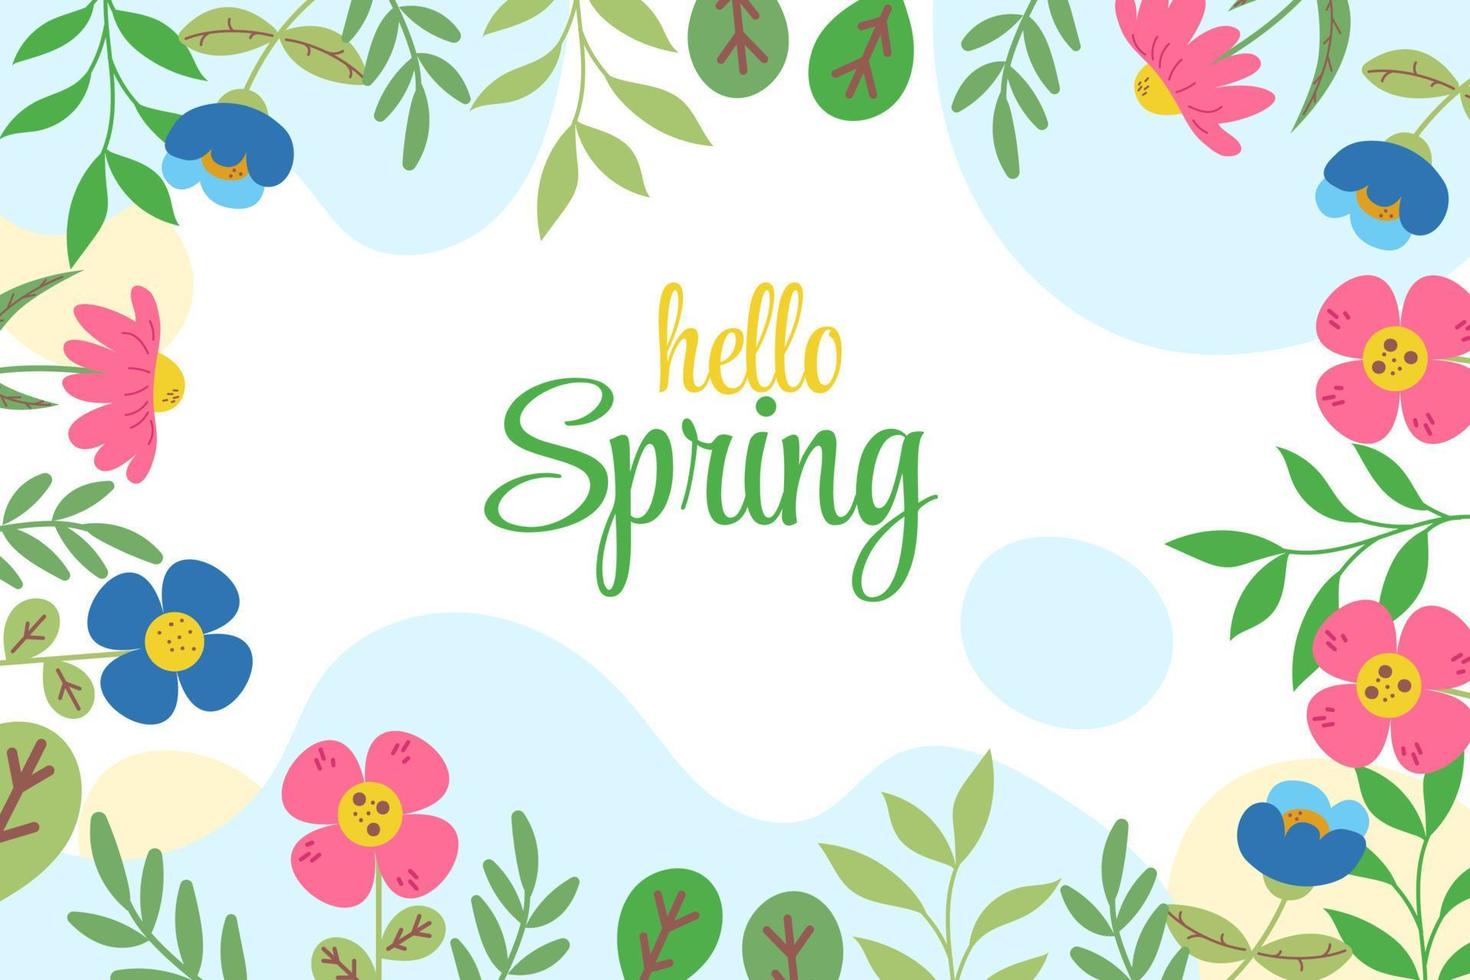 Flat spring background design with flowers. Hello spring vector